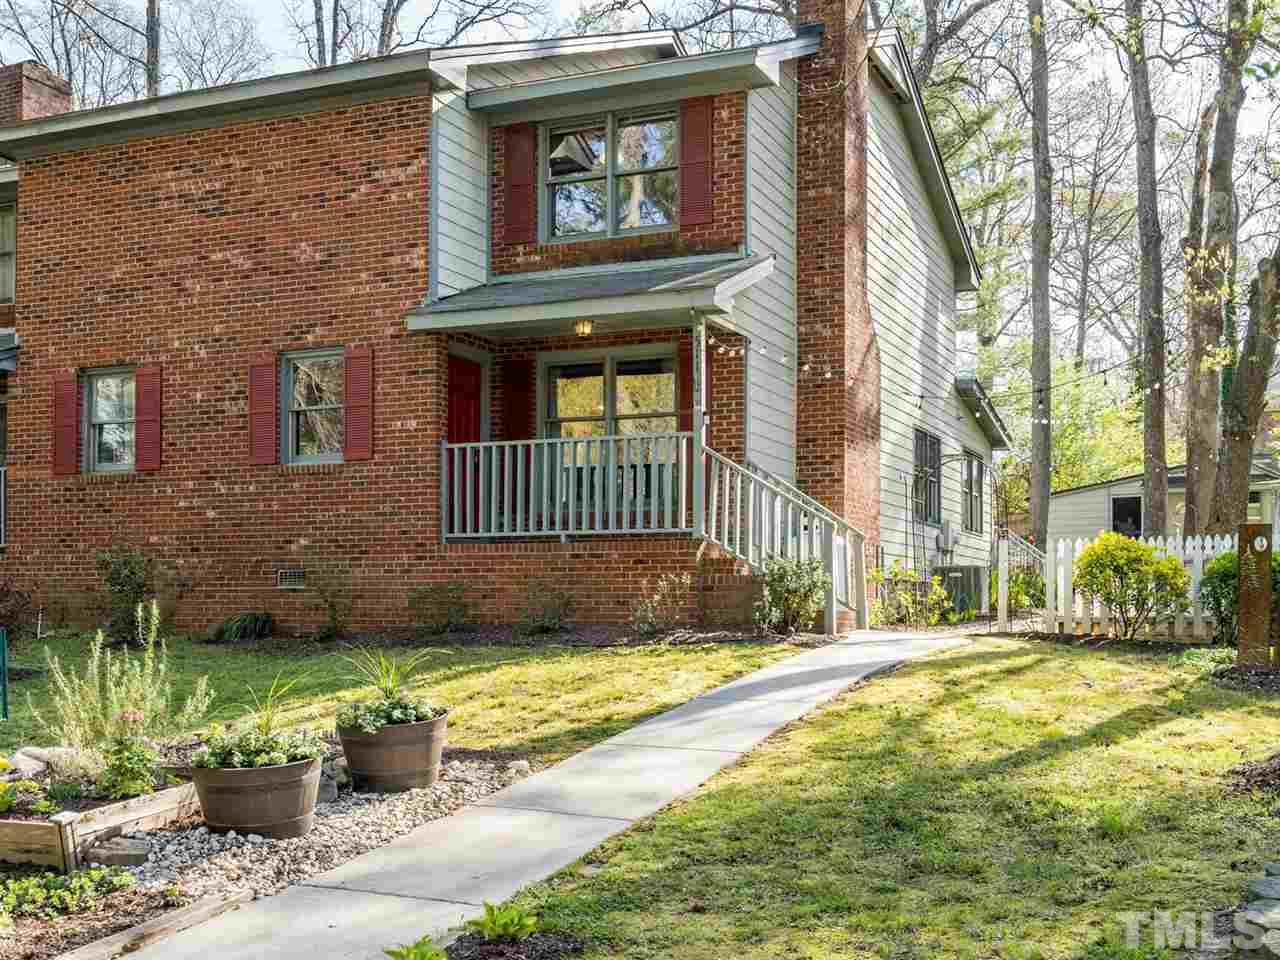 Welcome home to 511 Carolina Avenue.  This conveniently located home will be the perfect place to call home.  Minutes away from downtown Raleigh, NC State, Meredith, shopping, entertainment, restaurant and major roadways.